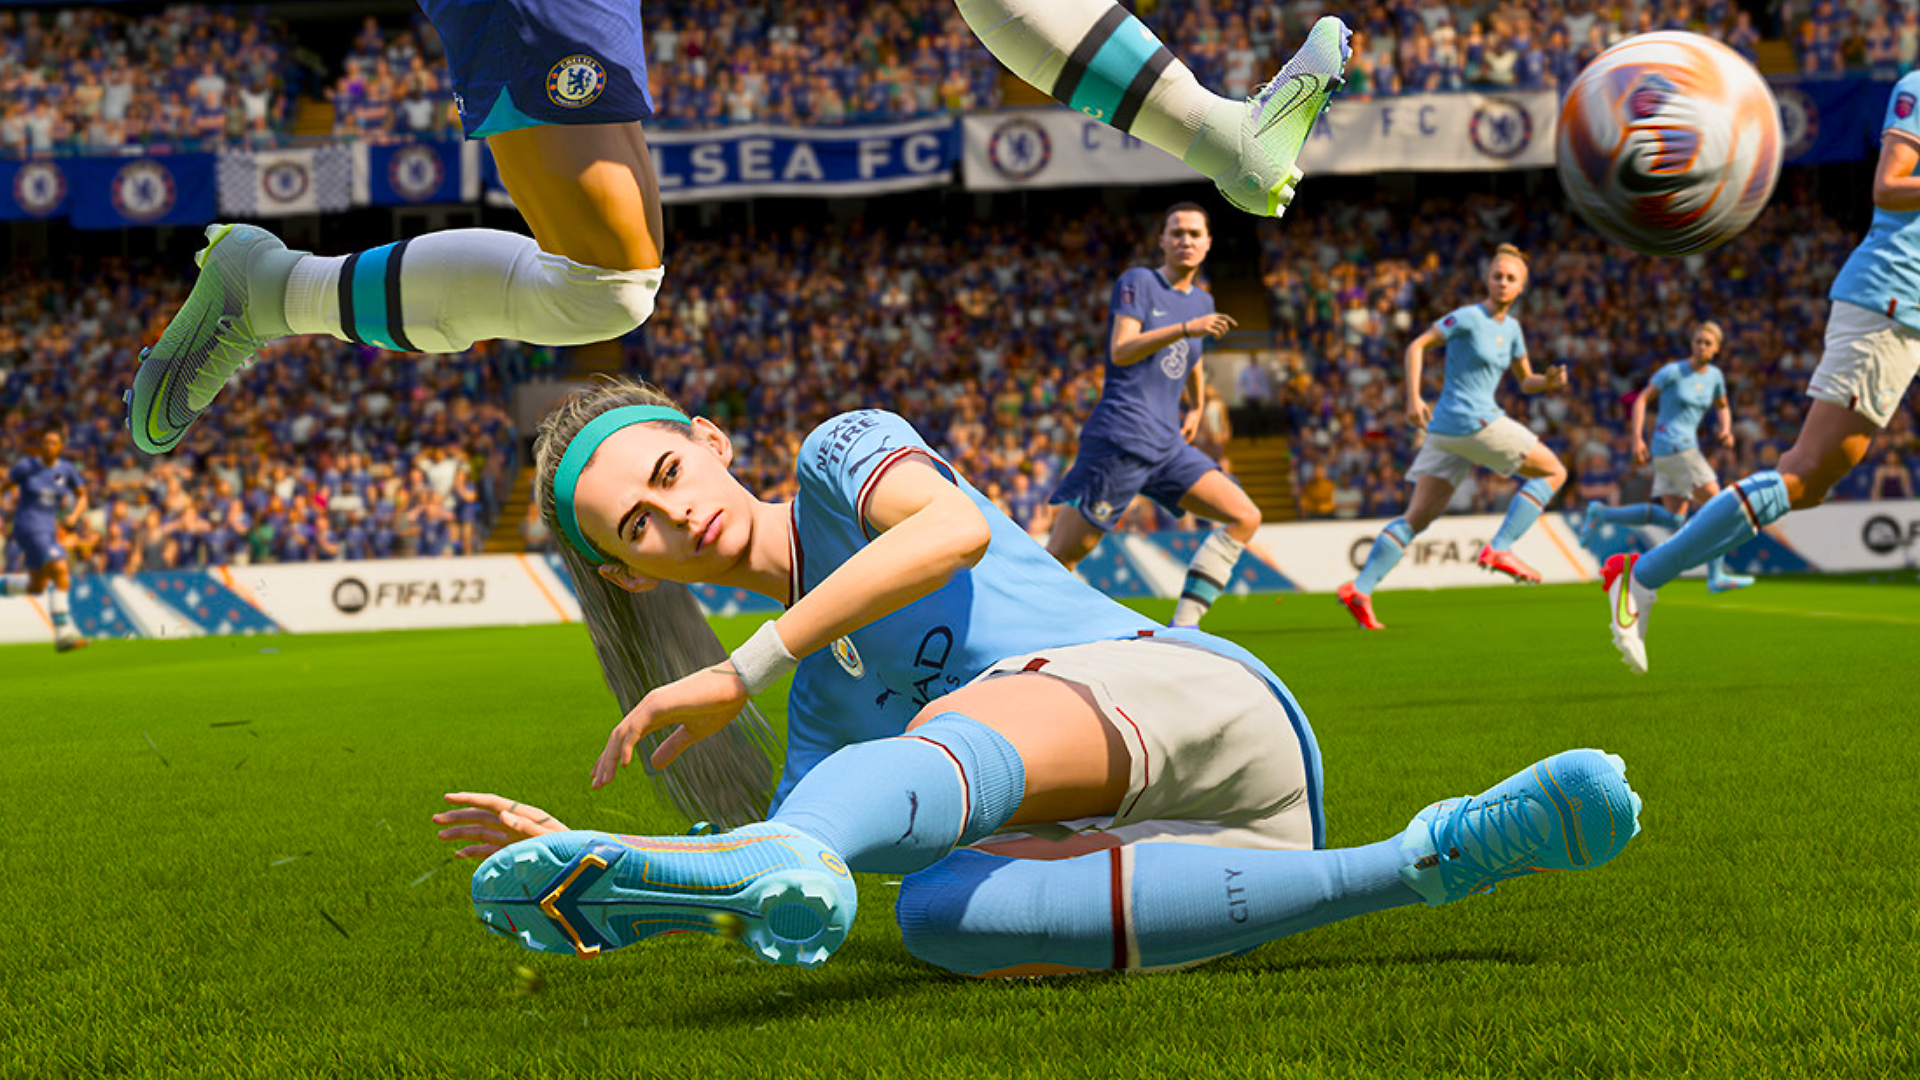 Fifa 23 system requirements: Virtual player leaping for ball with slide tackling on pitch